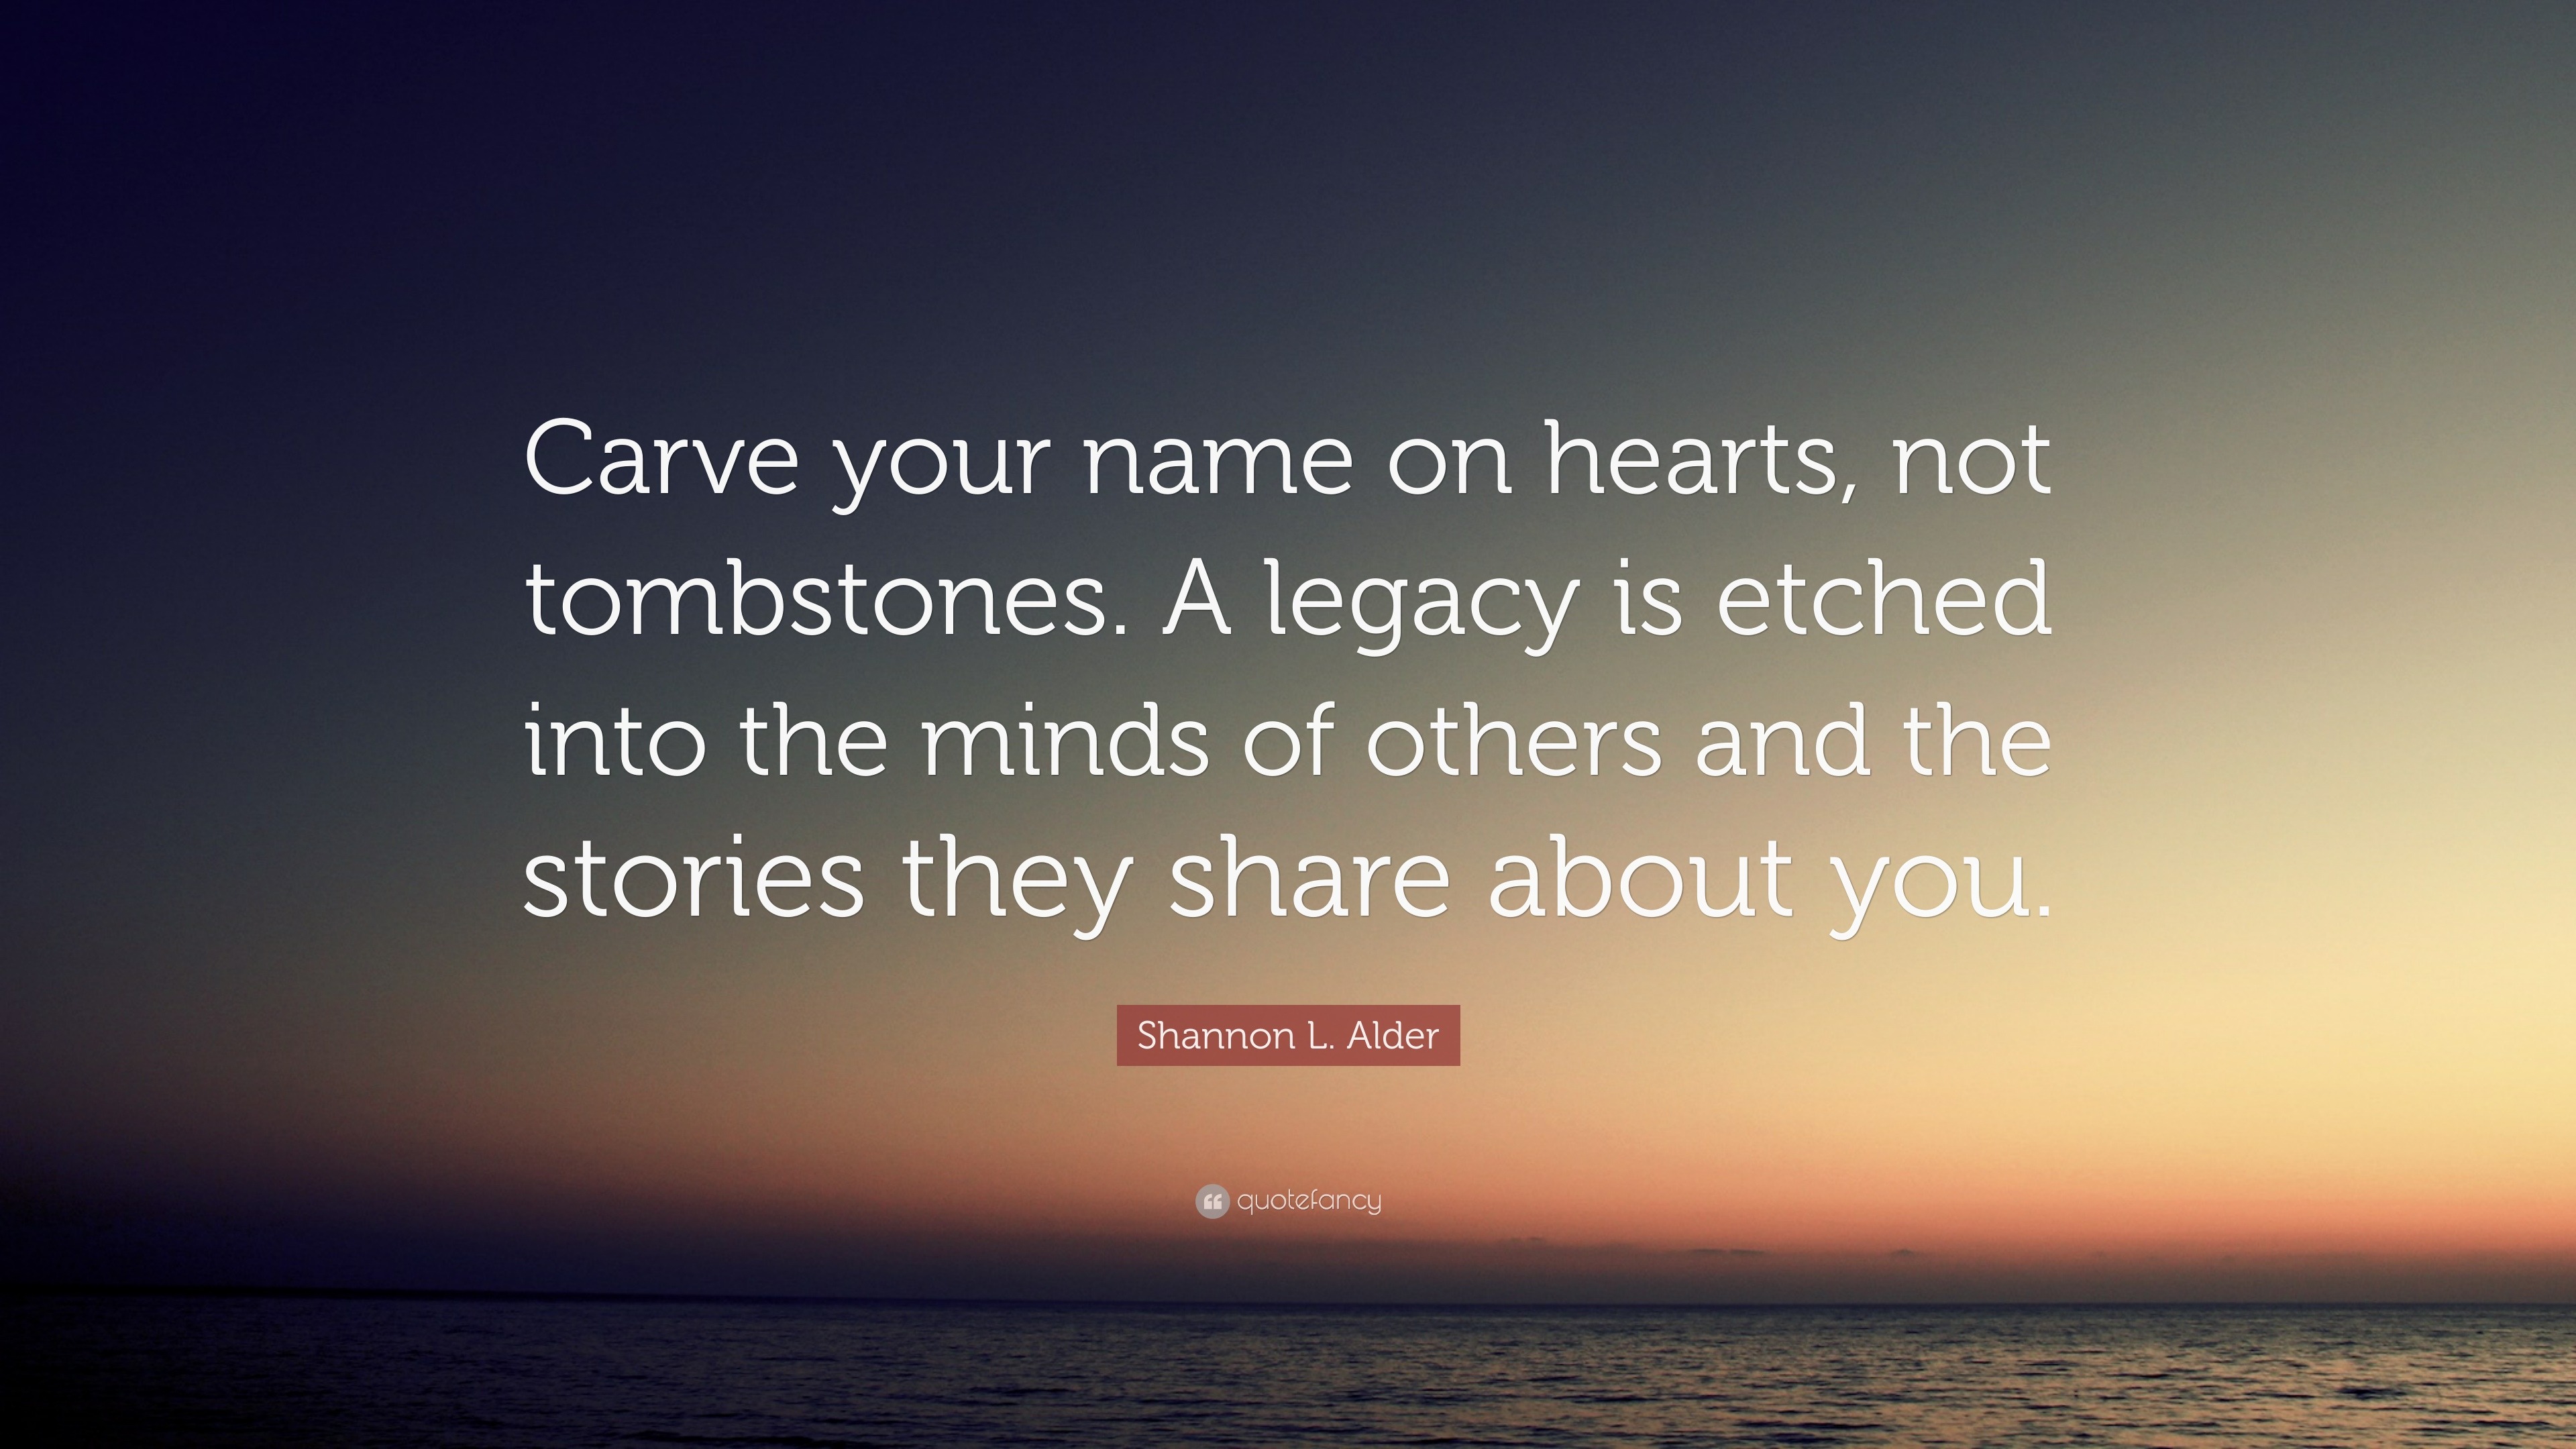 Shannon L. Alder Quote: “Carve your name on hearts, not tombstones. A